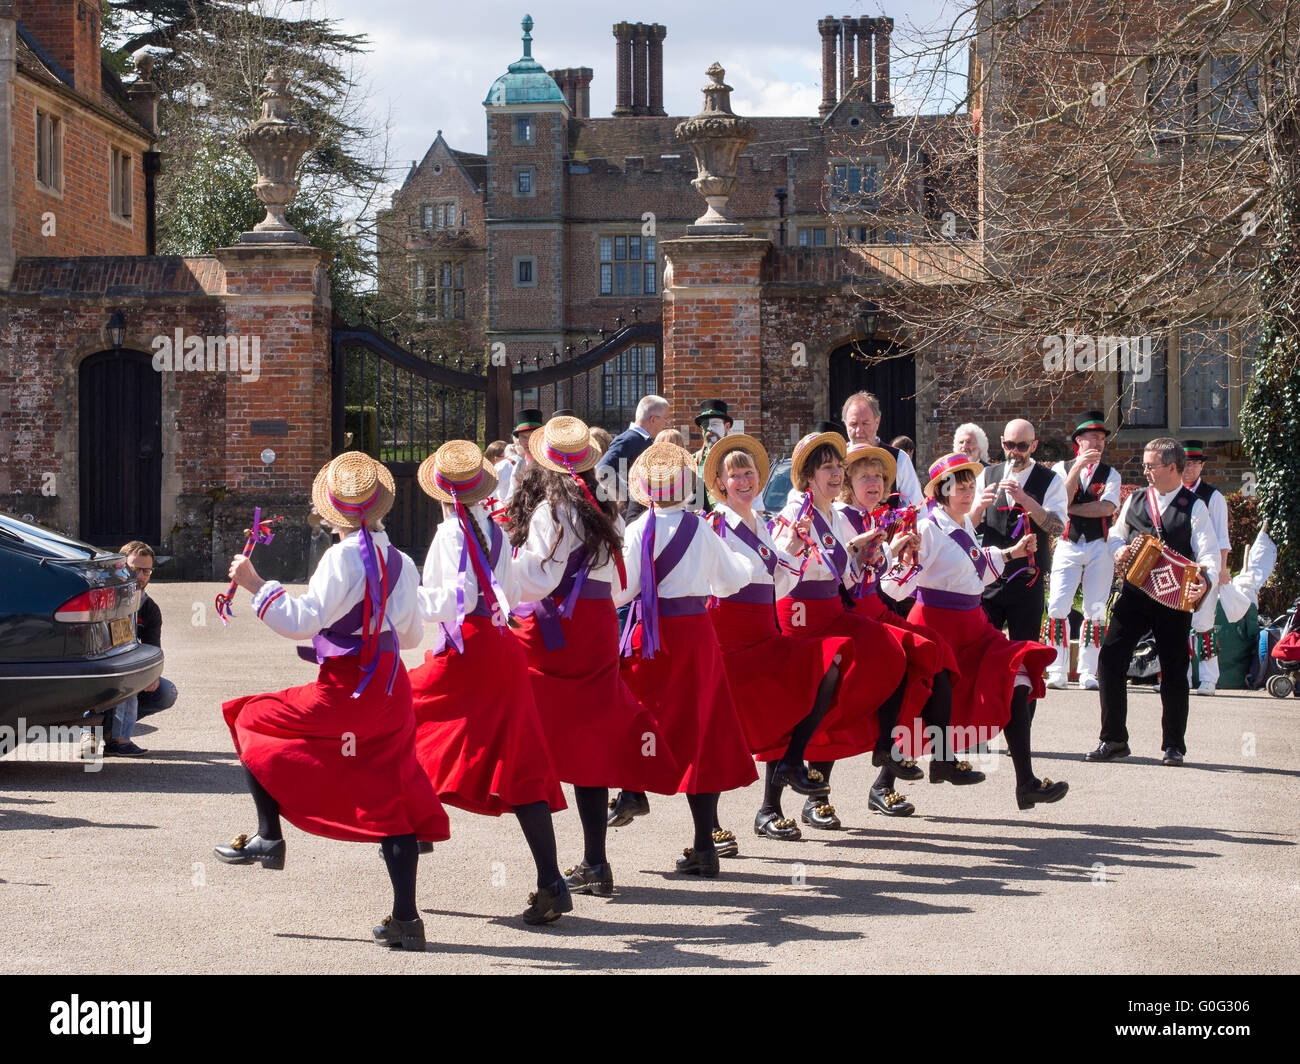 Women English folk dancers in the Square at Chilham Kent UK Stock Photo